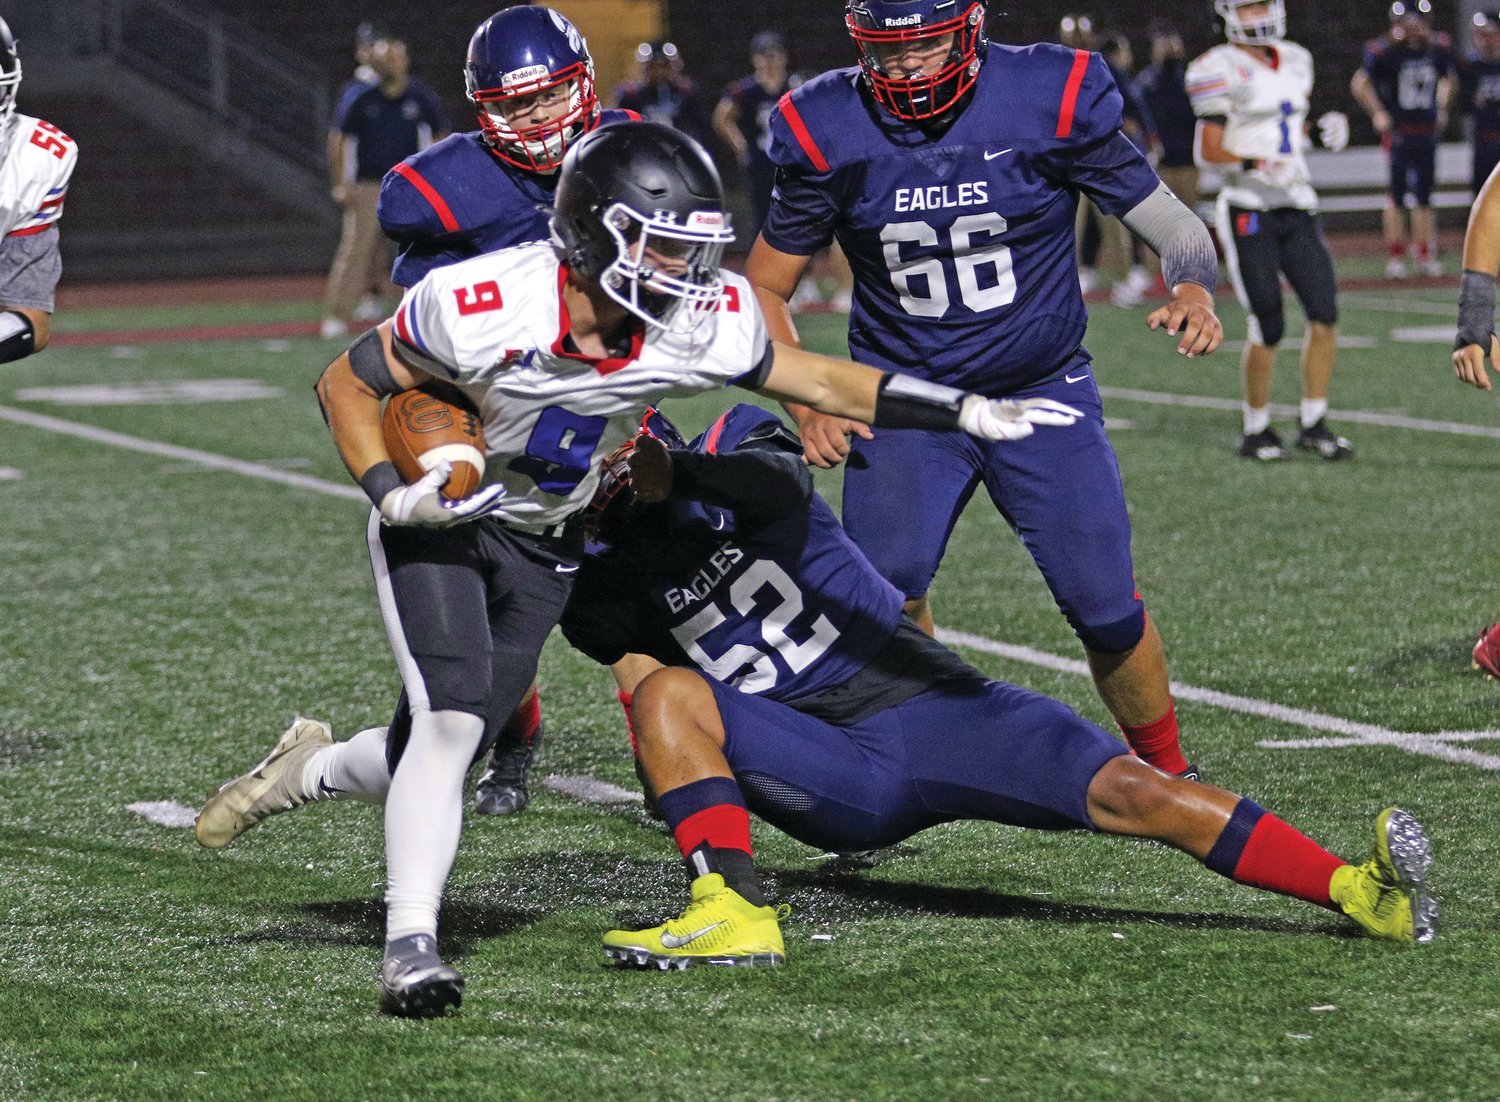 EJ running back Aaron Glanz is wrapped up during a run by an Eagle defender.